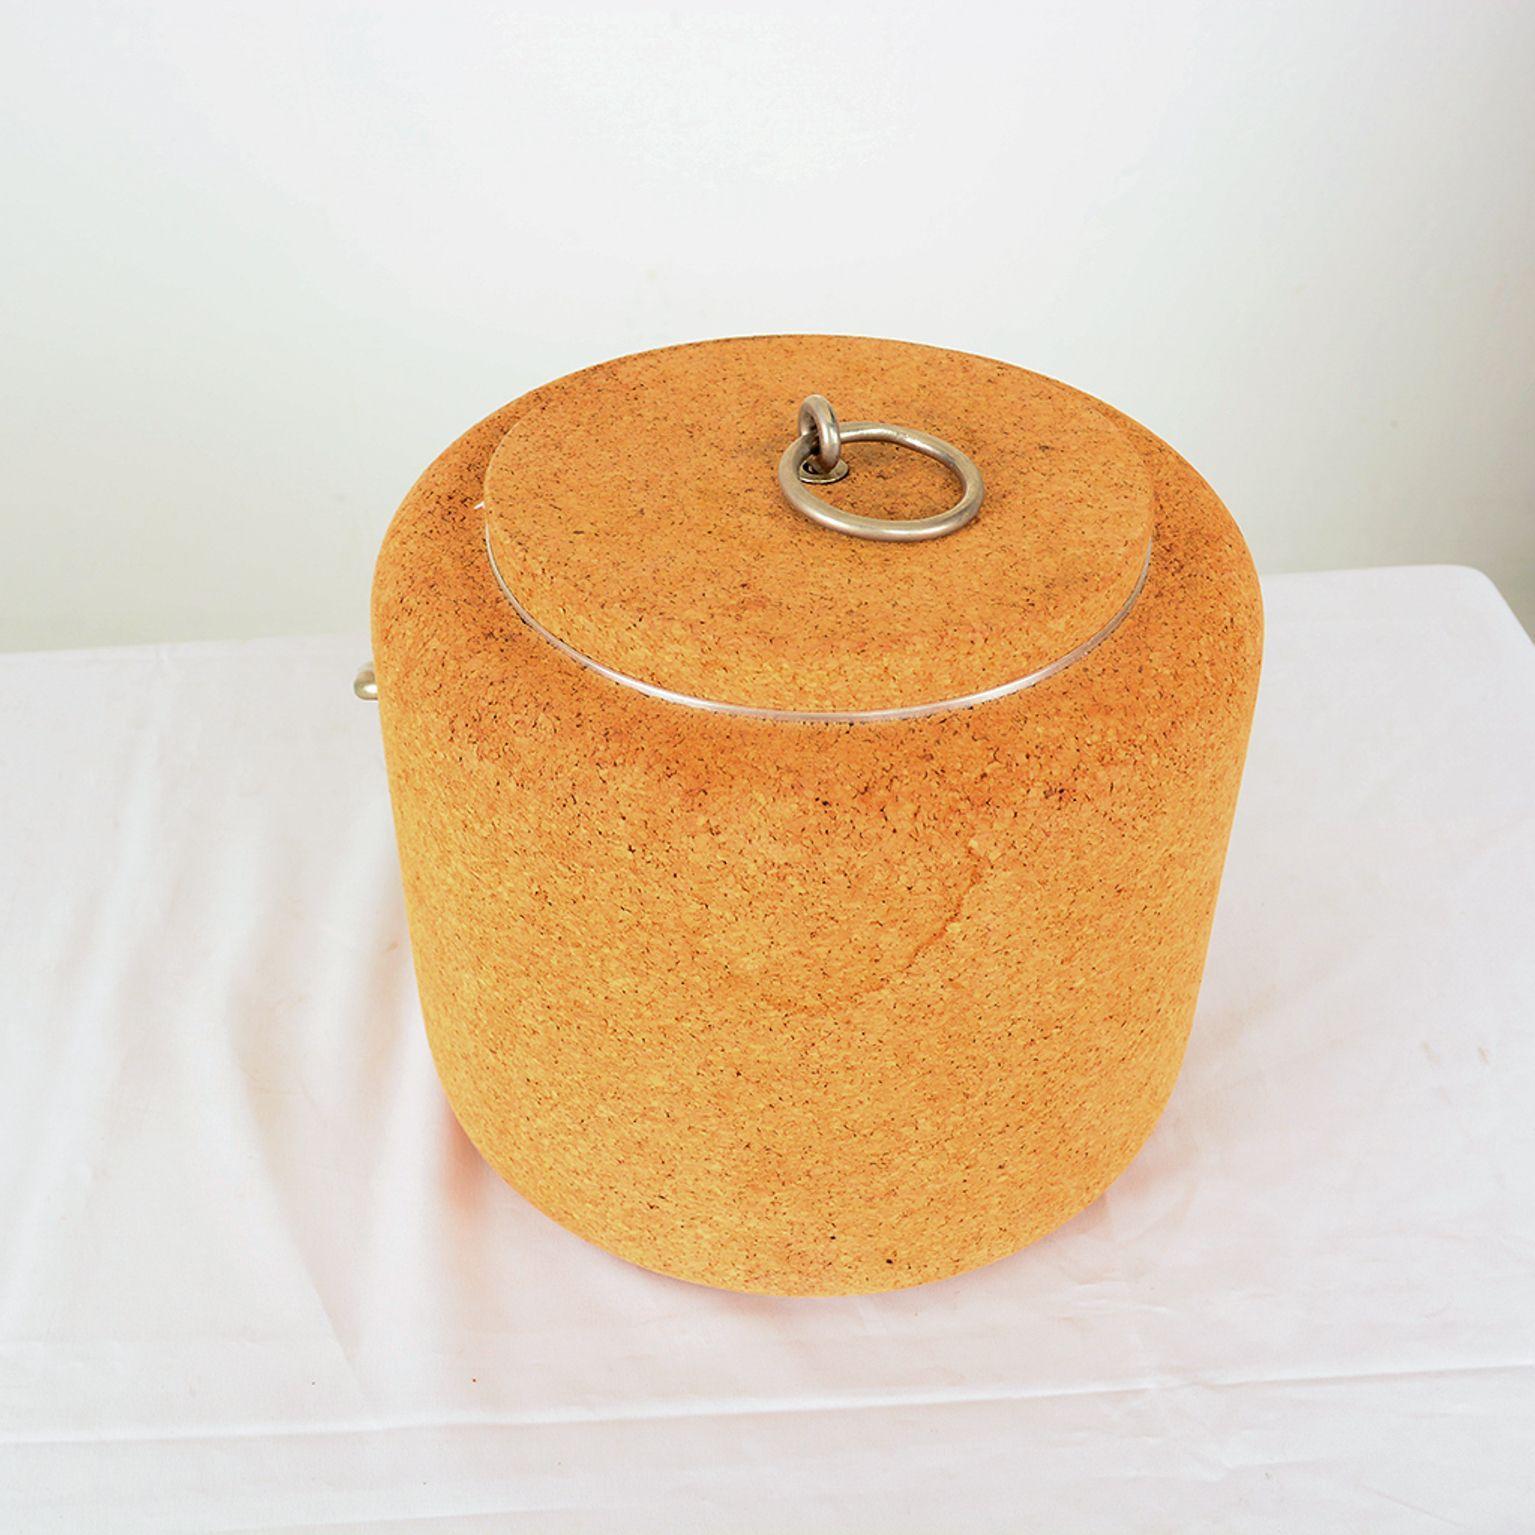 For your consideration: 1970s modernist cork ice bucket designed by Signe Persson Melin for the company Boda Nova. Made in Sweden, circa 1970s. The inner aluminum container is covered with a cork insulating layer. Original preowned fair vintage